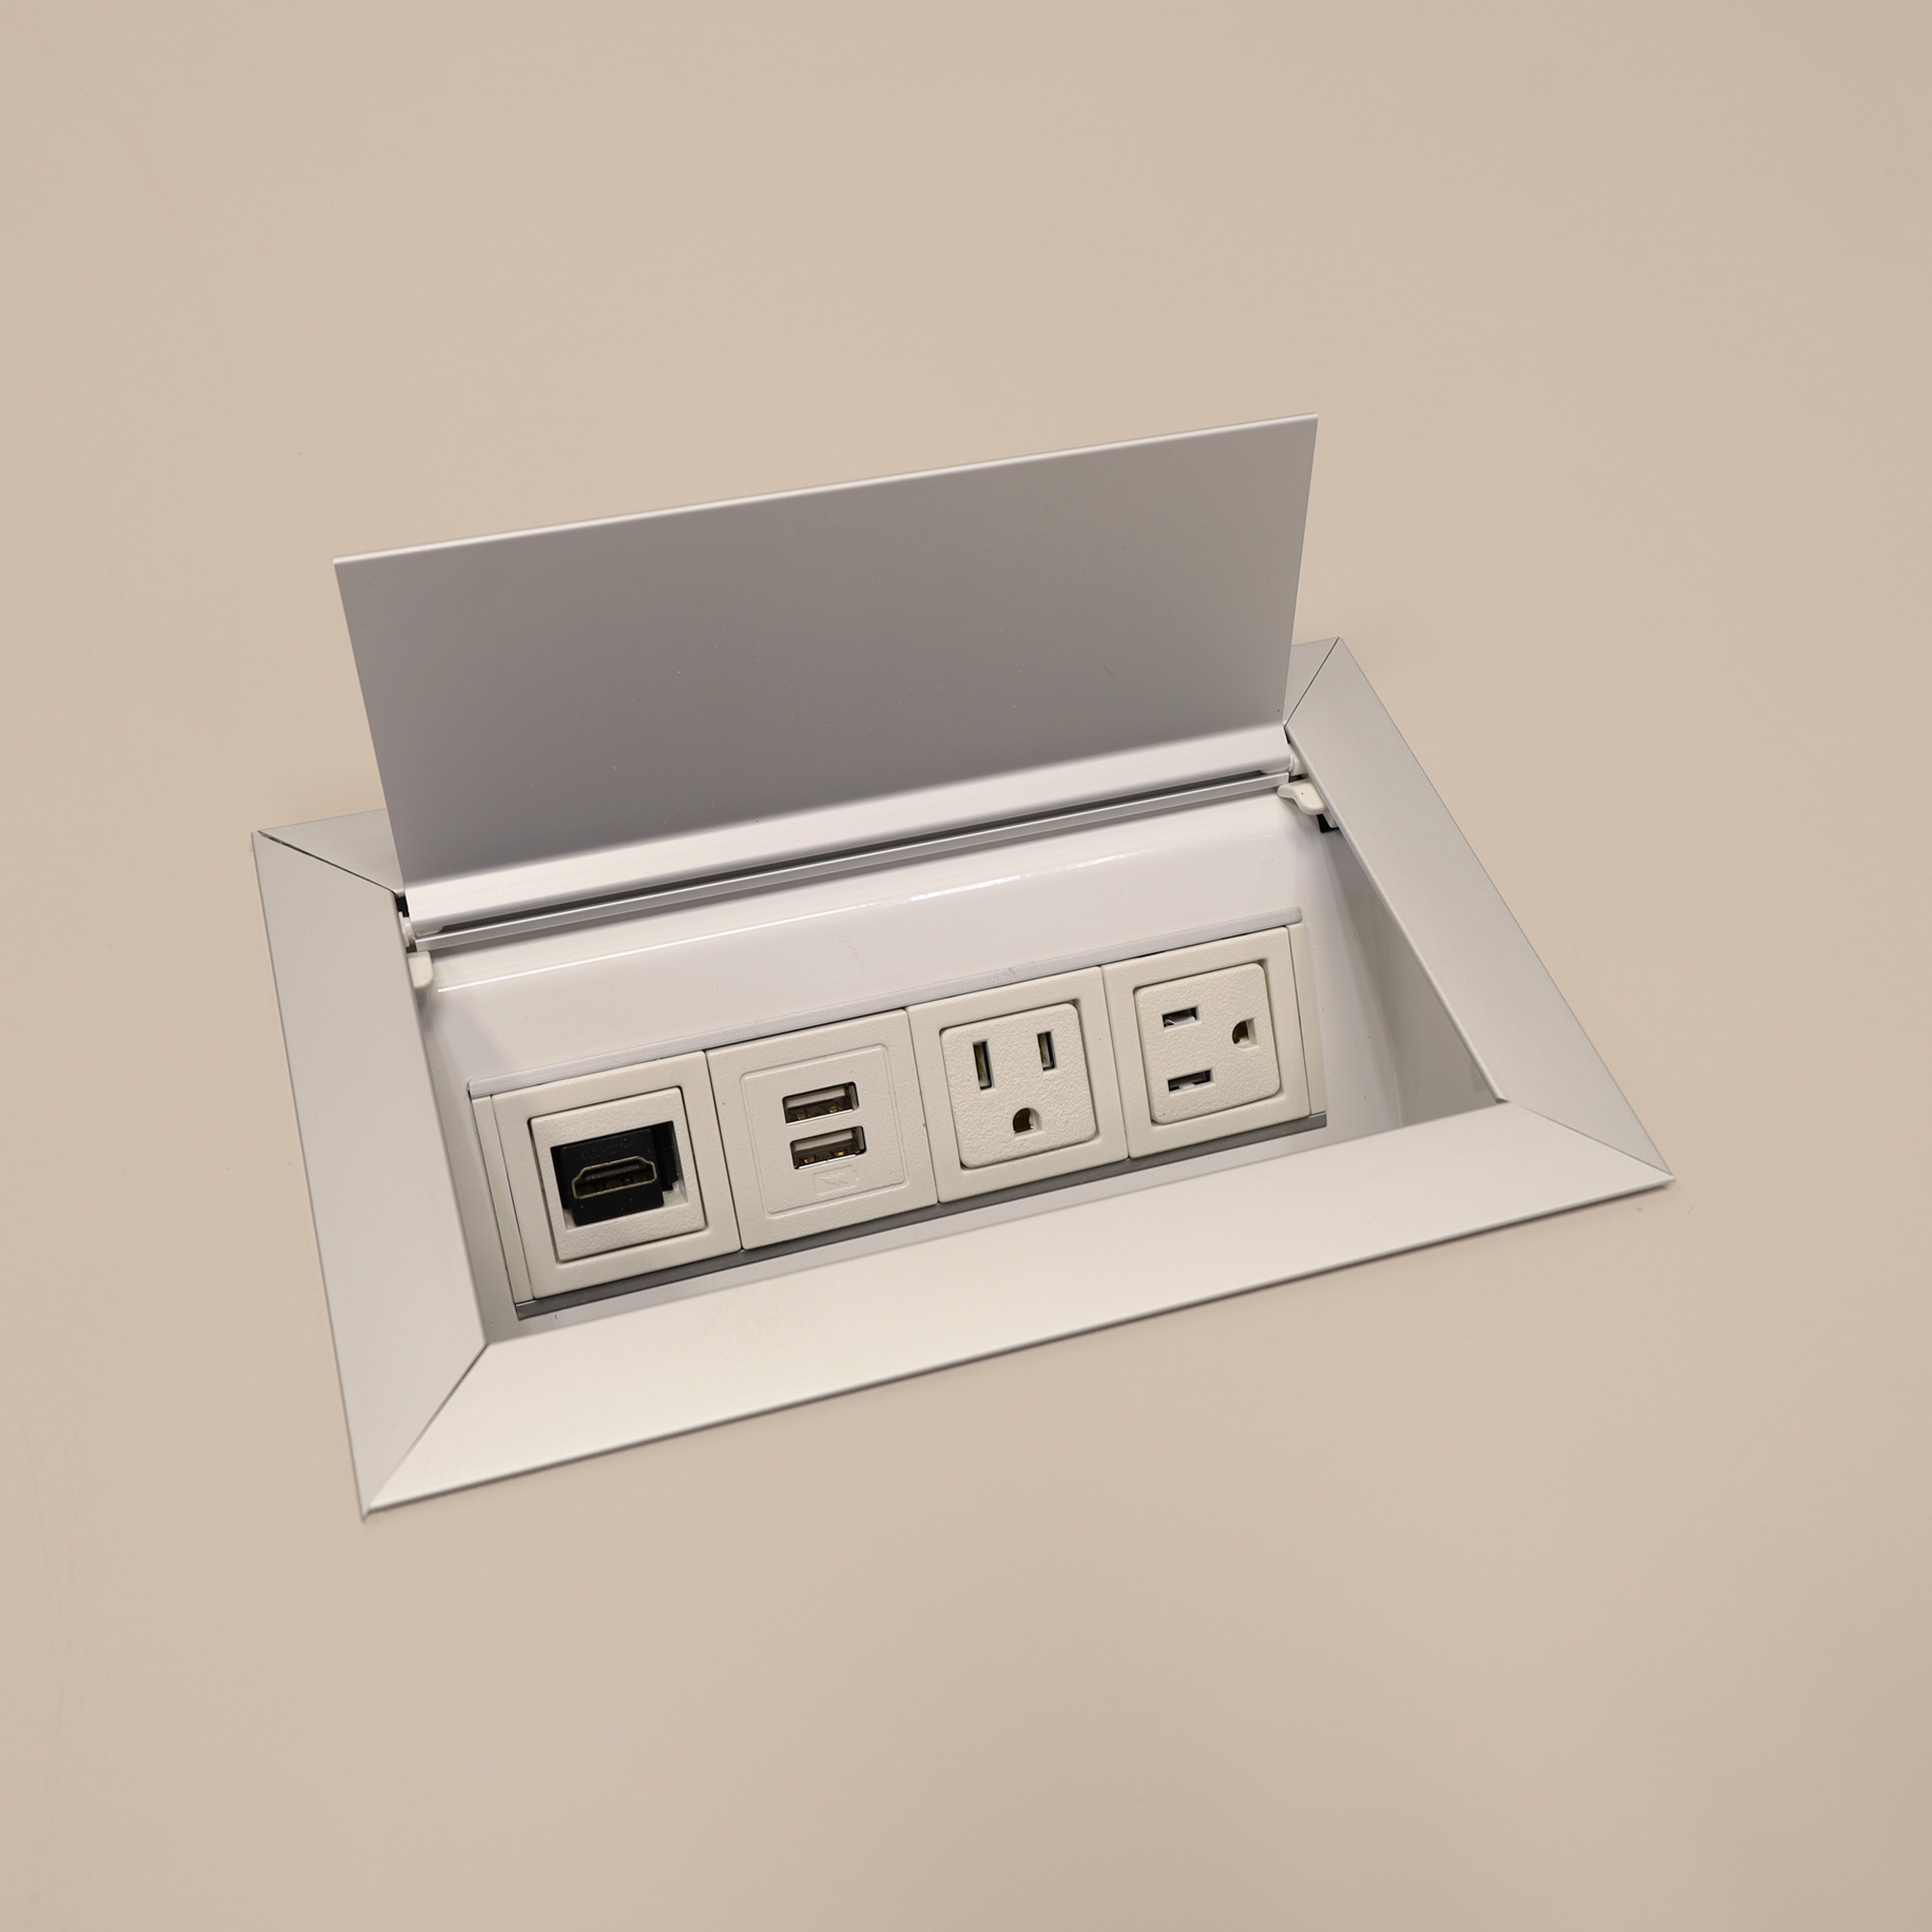 One Ellora power box with HDMI, USB-A and AC power shown here.